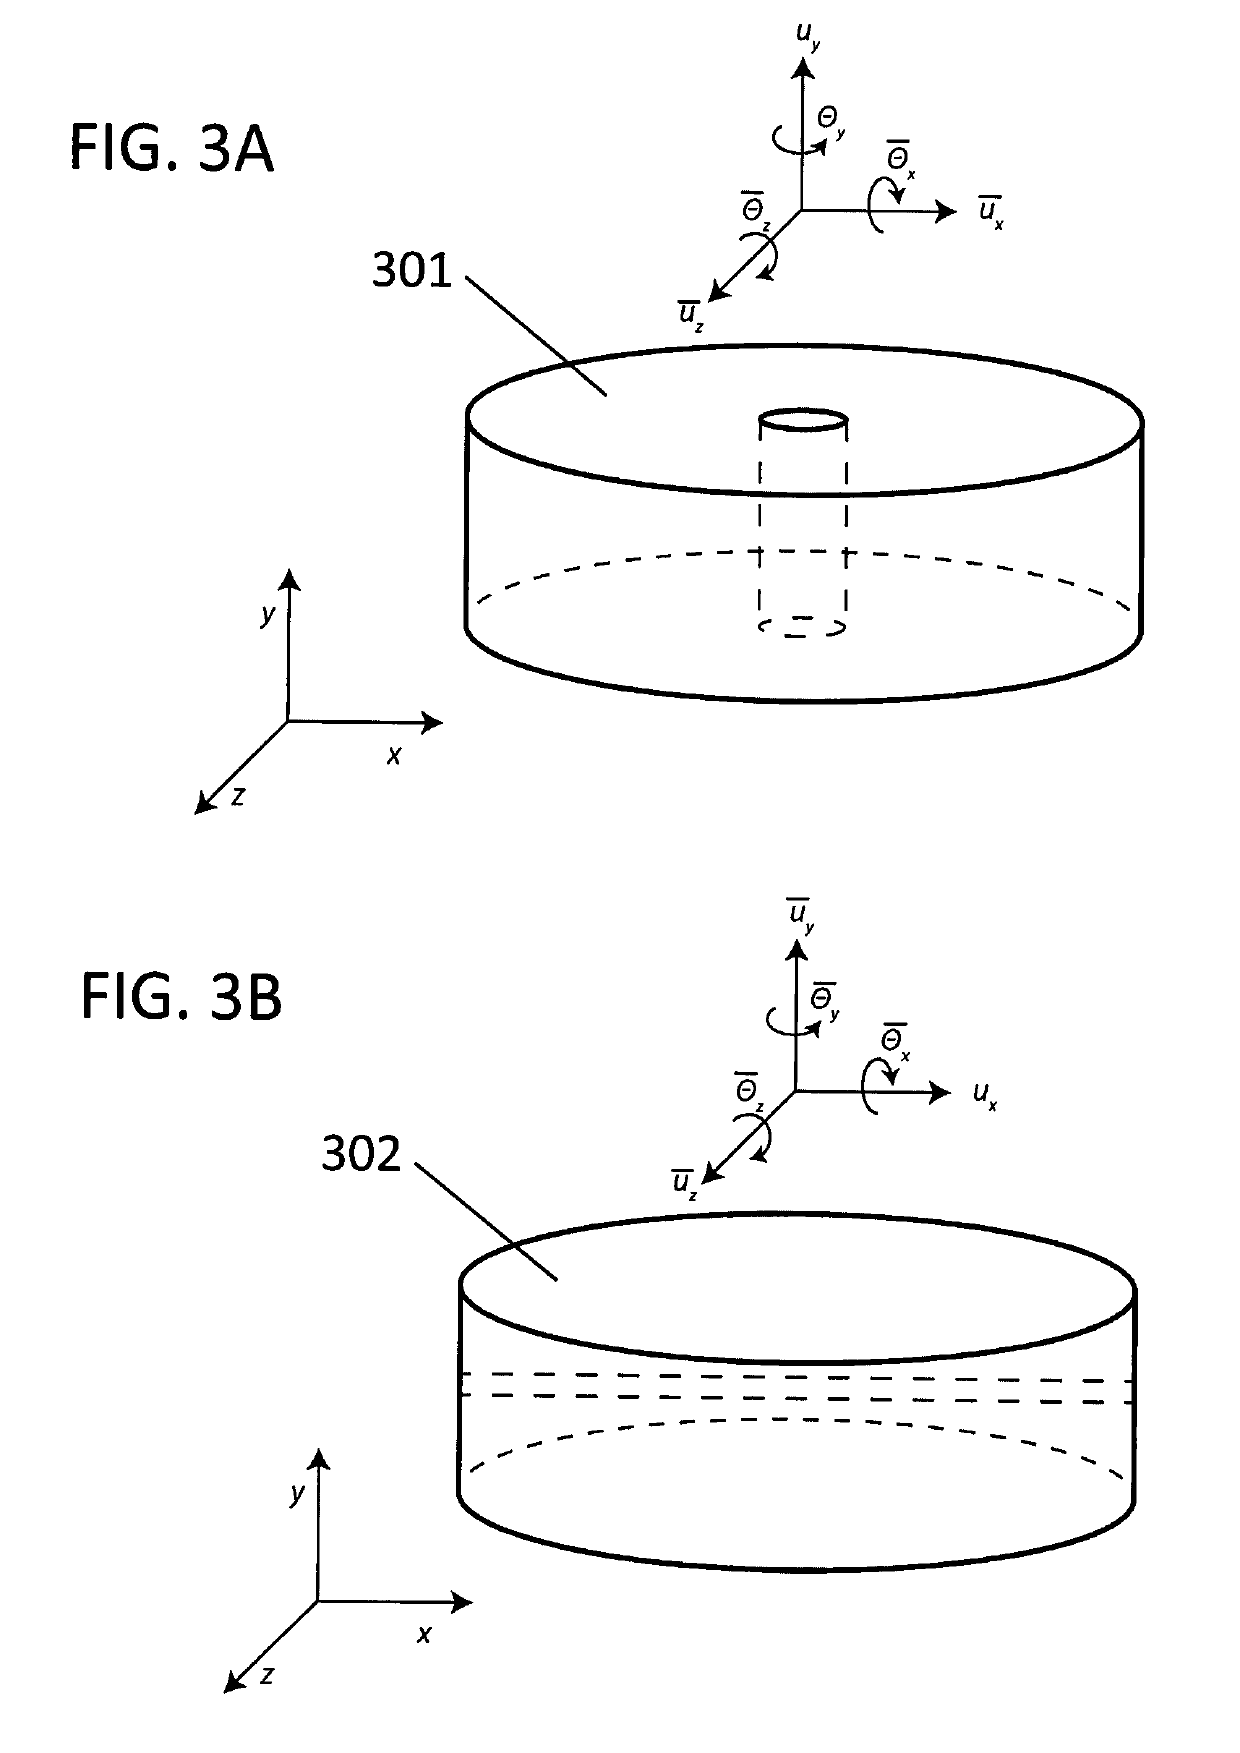 Optical flow cell assembly incorporating a replaceable transparent flow cell